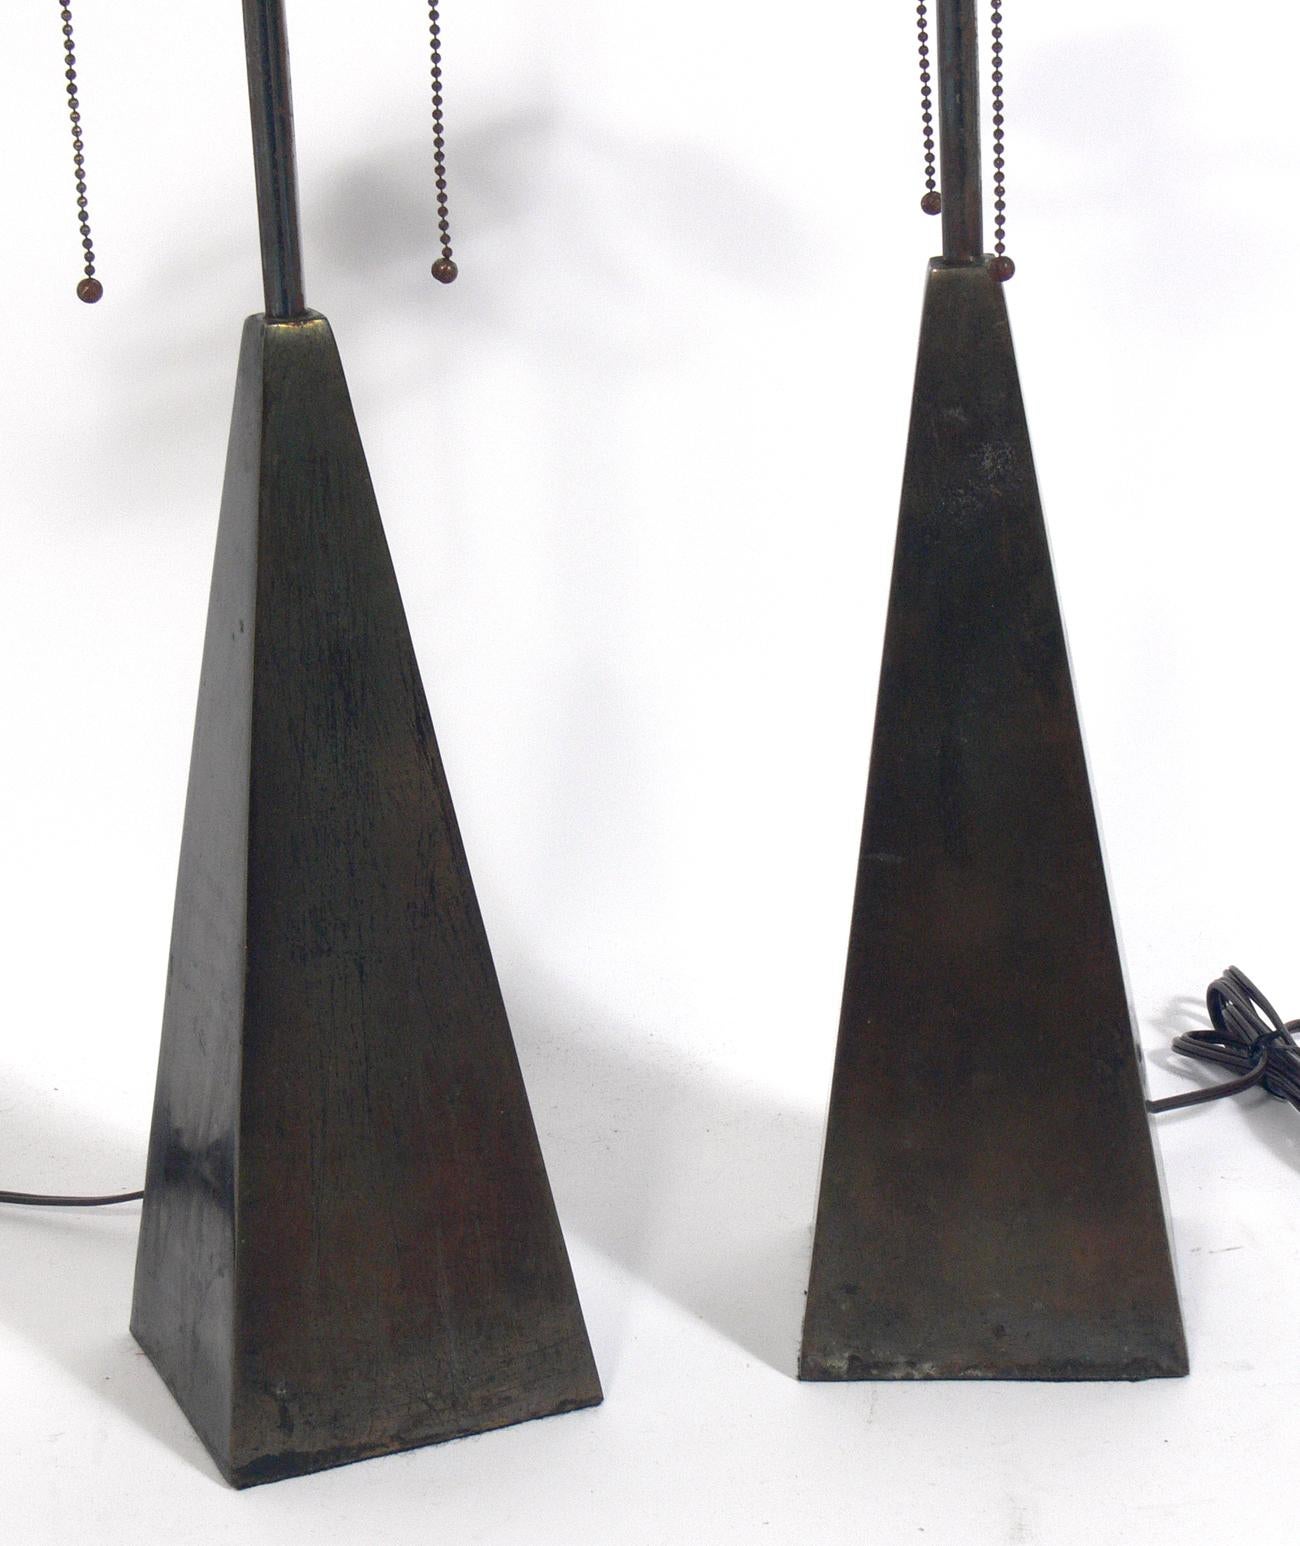 Pair of brass Obelisk lamps, American, circa 1960s. They retain their original distressed bronze color patina. They have been rewired and are ready to use. The price and measurements noted includes the shades.